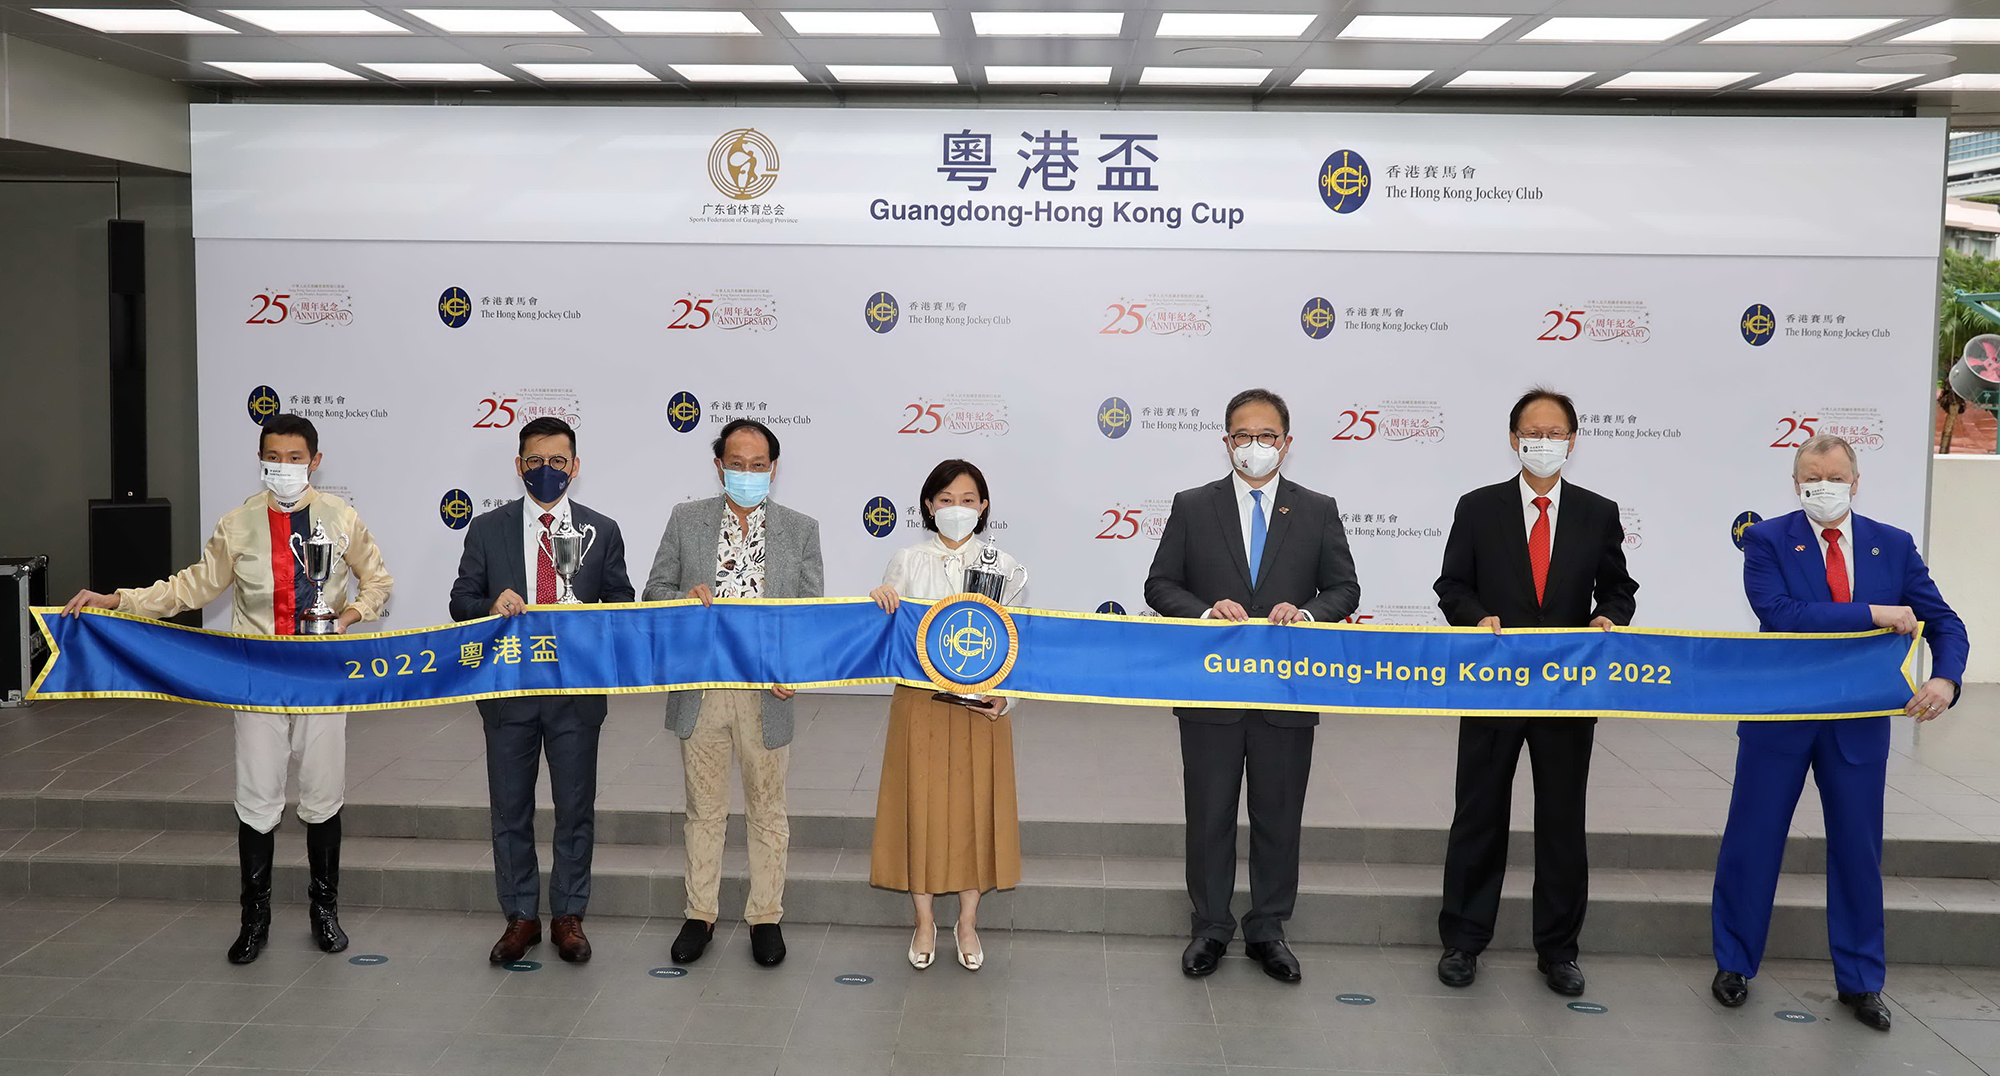 Permanent Secretary for Culture, Sports and Tourism of the HKSAR Government, Joe Wong (3rd right); Club Chairman Philip Chen (2nd right) and Club Chief Executive Officer Winfried Engelbrecht-Bresges (1st right) at the Guangdong-Hong Kong Cup trophy presentation ceremony.